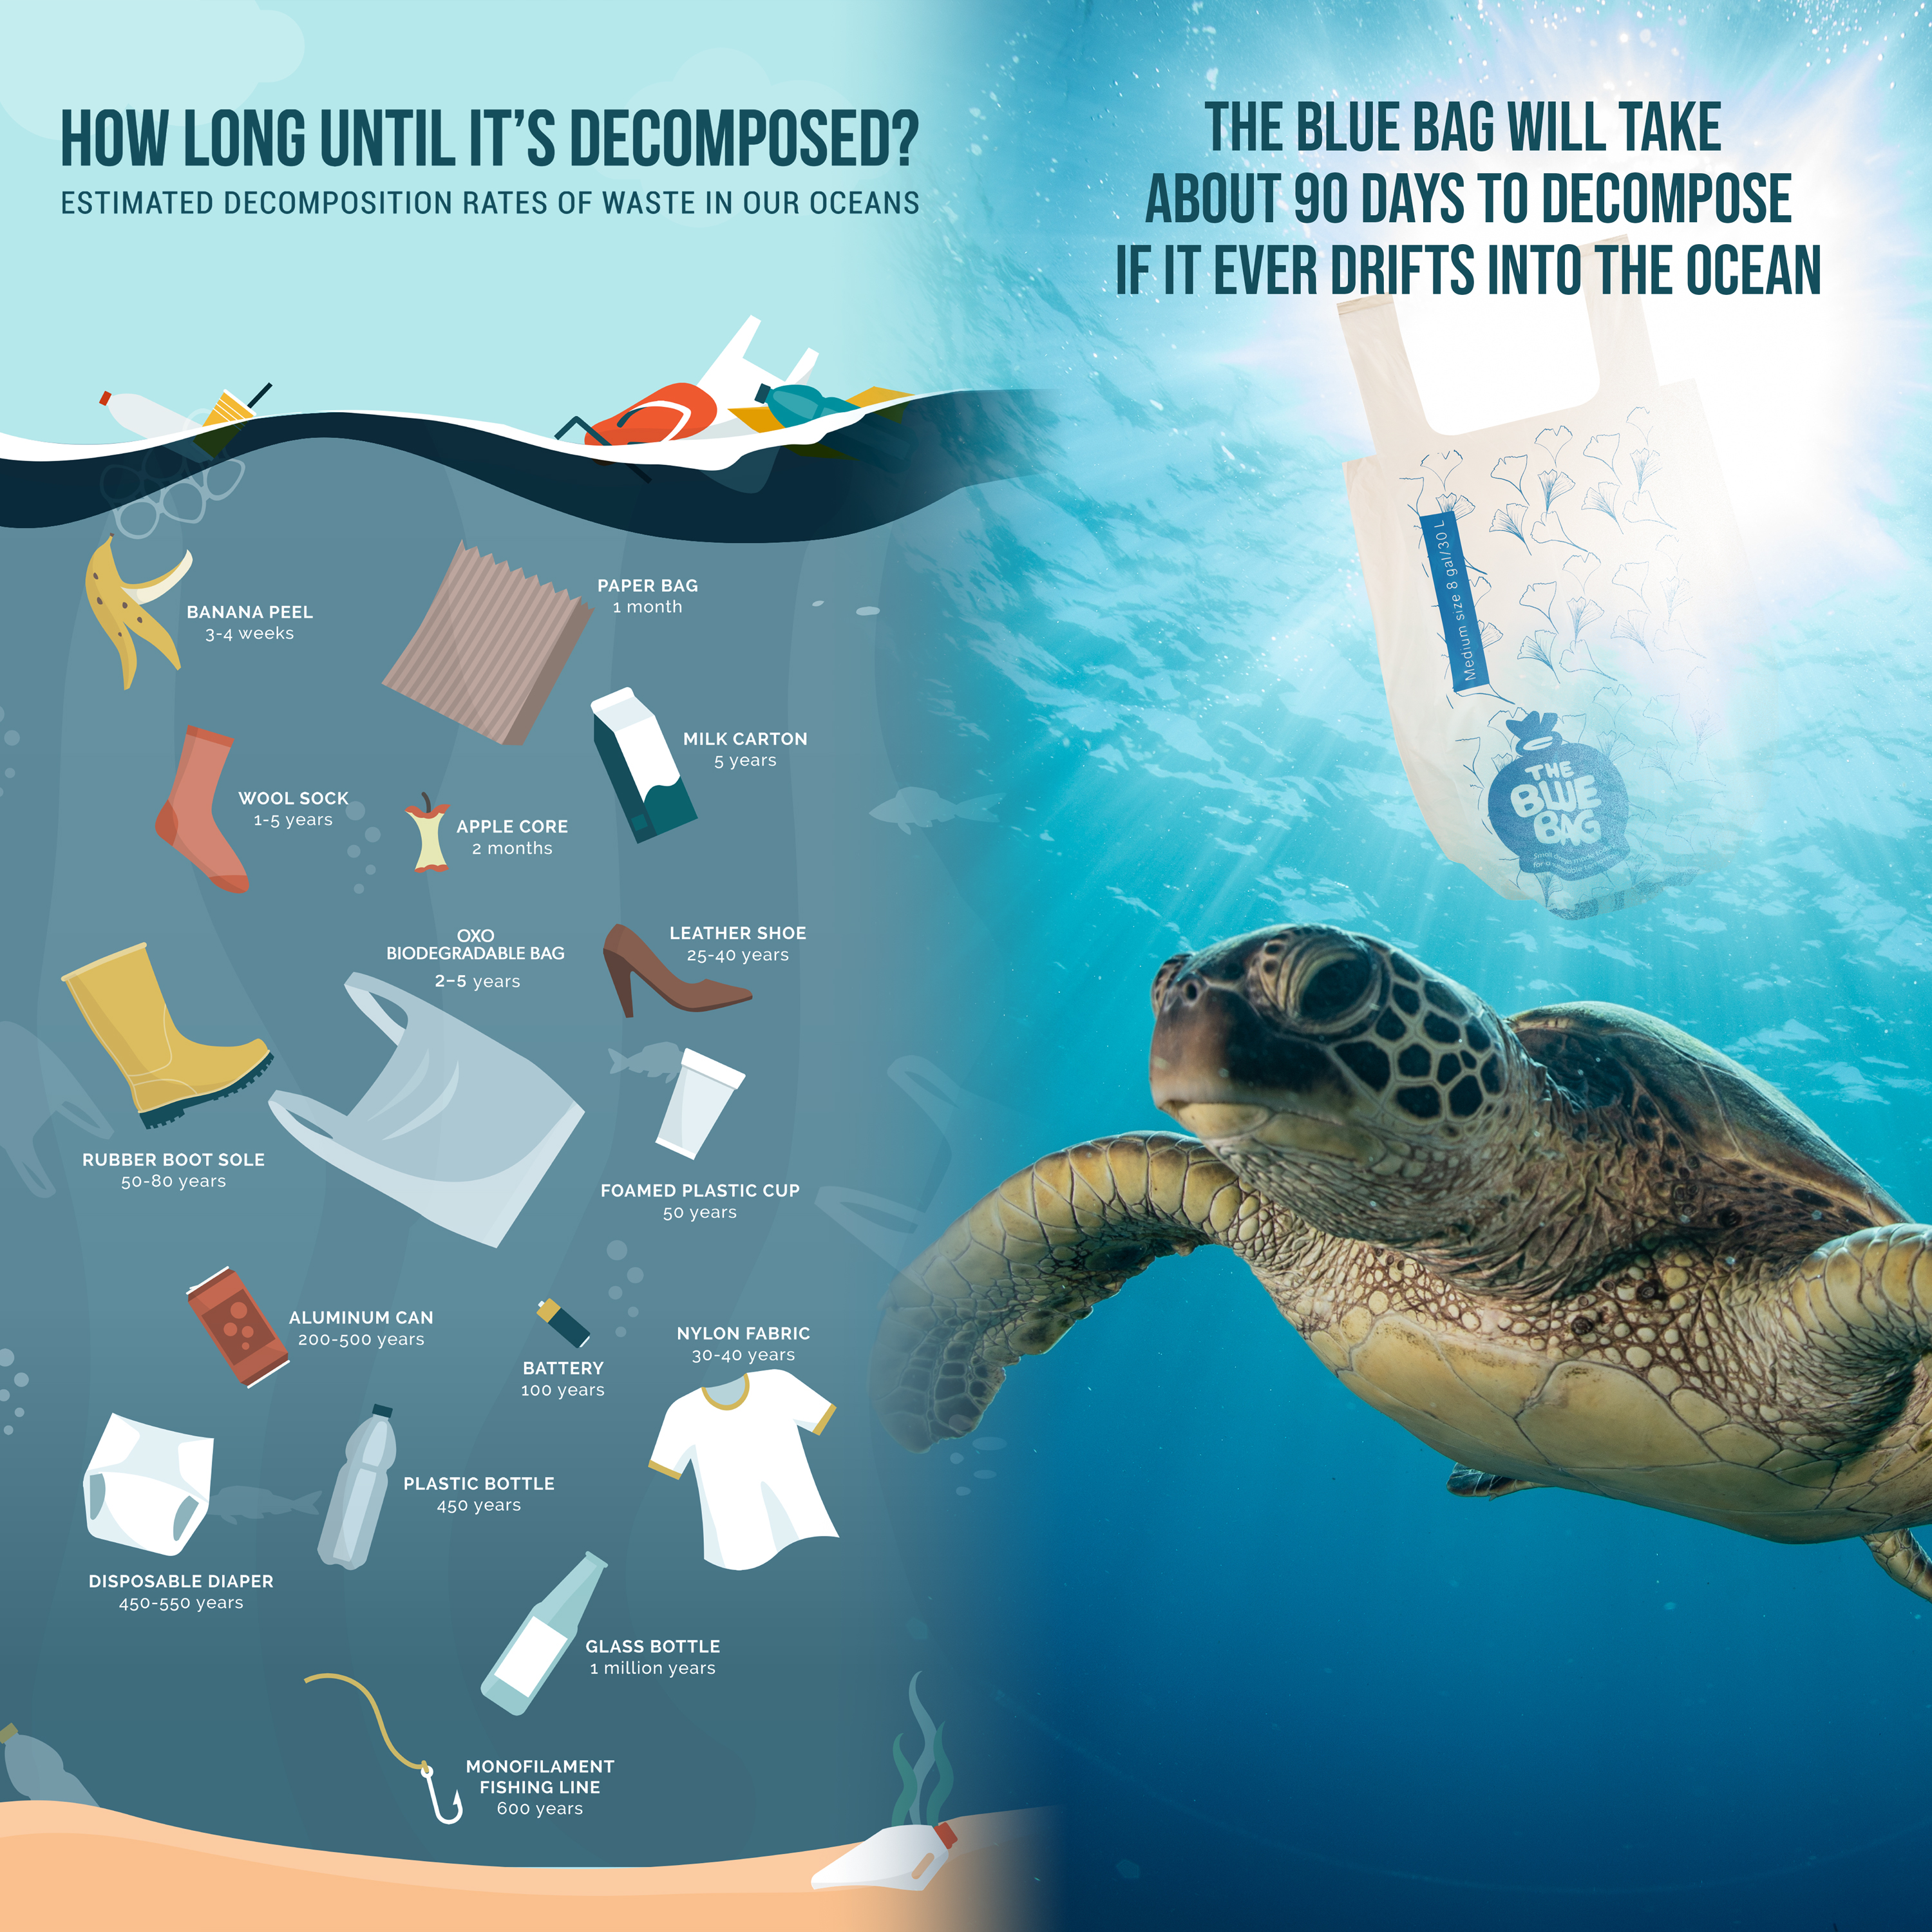 The Blue Bag in the ocean will decompose in about 90 days